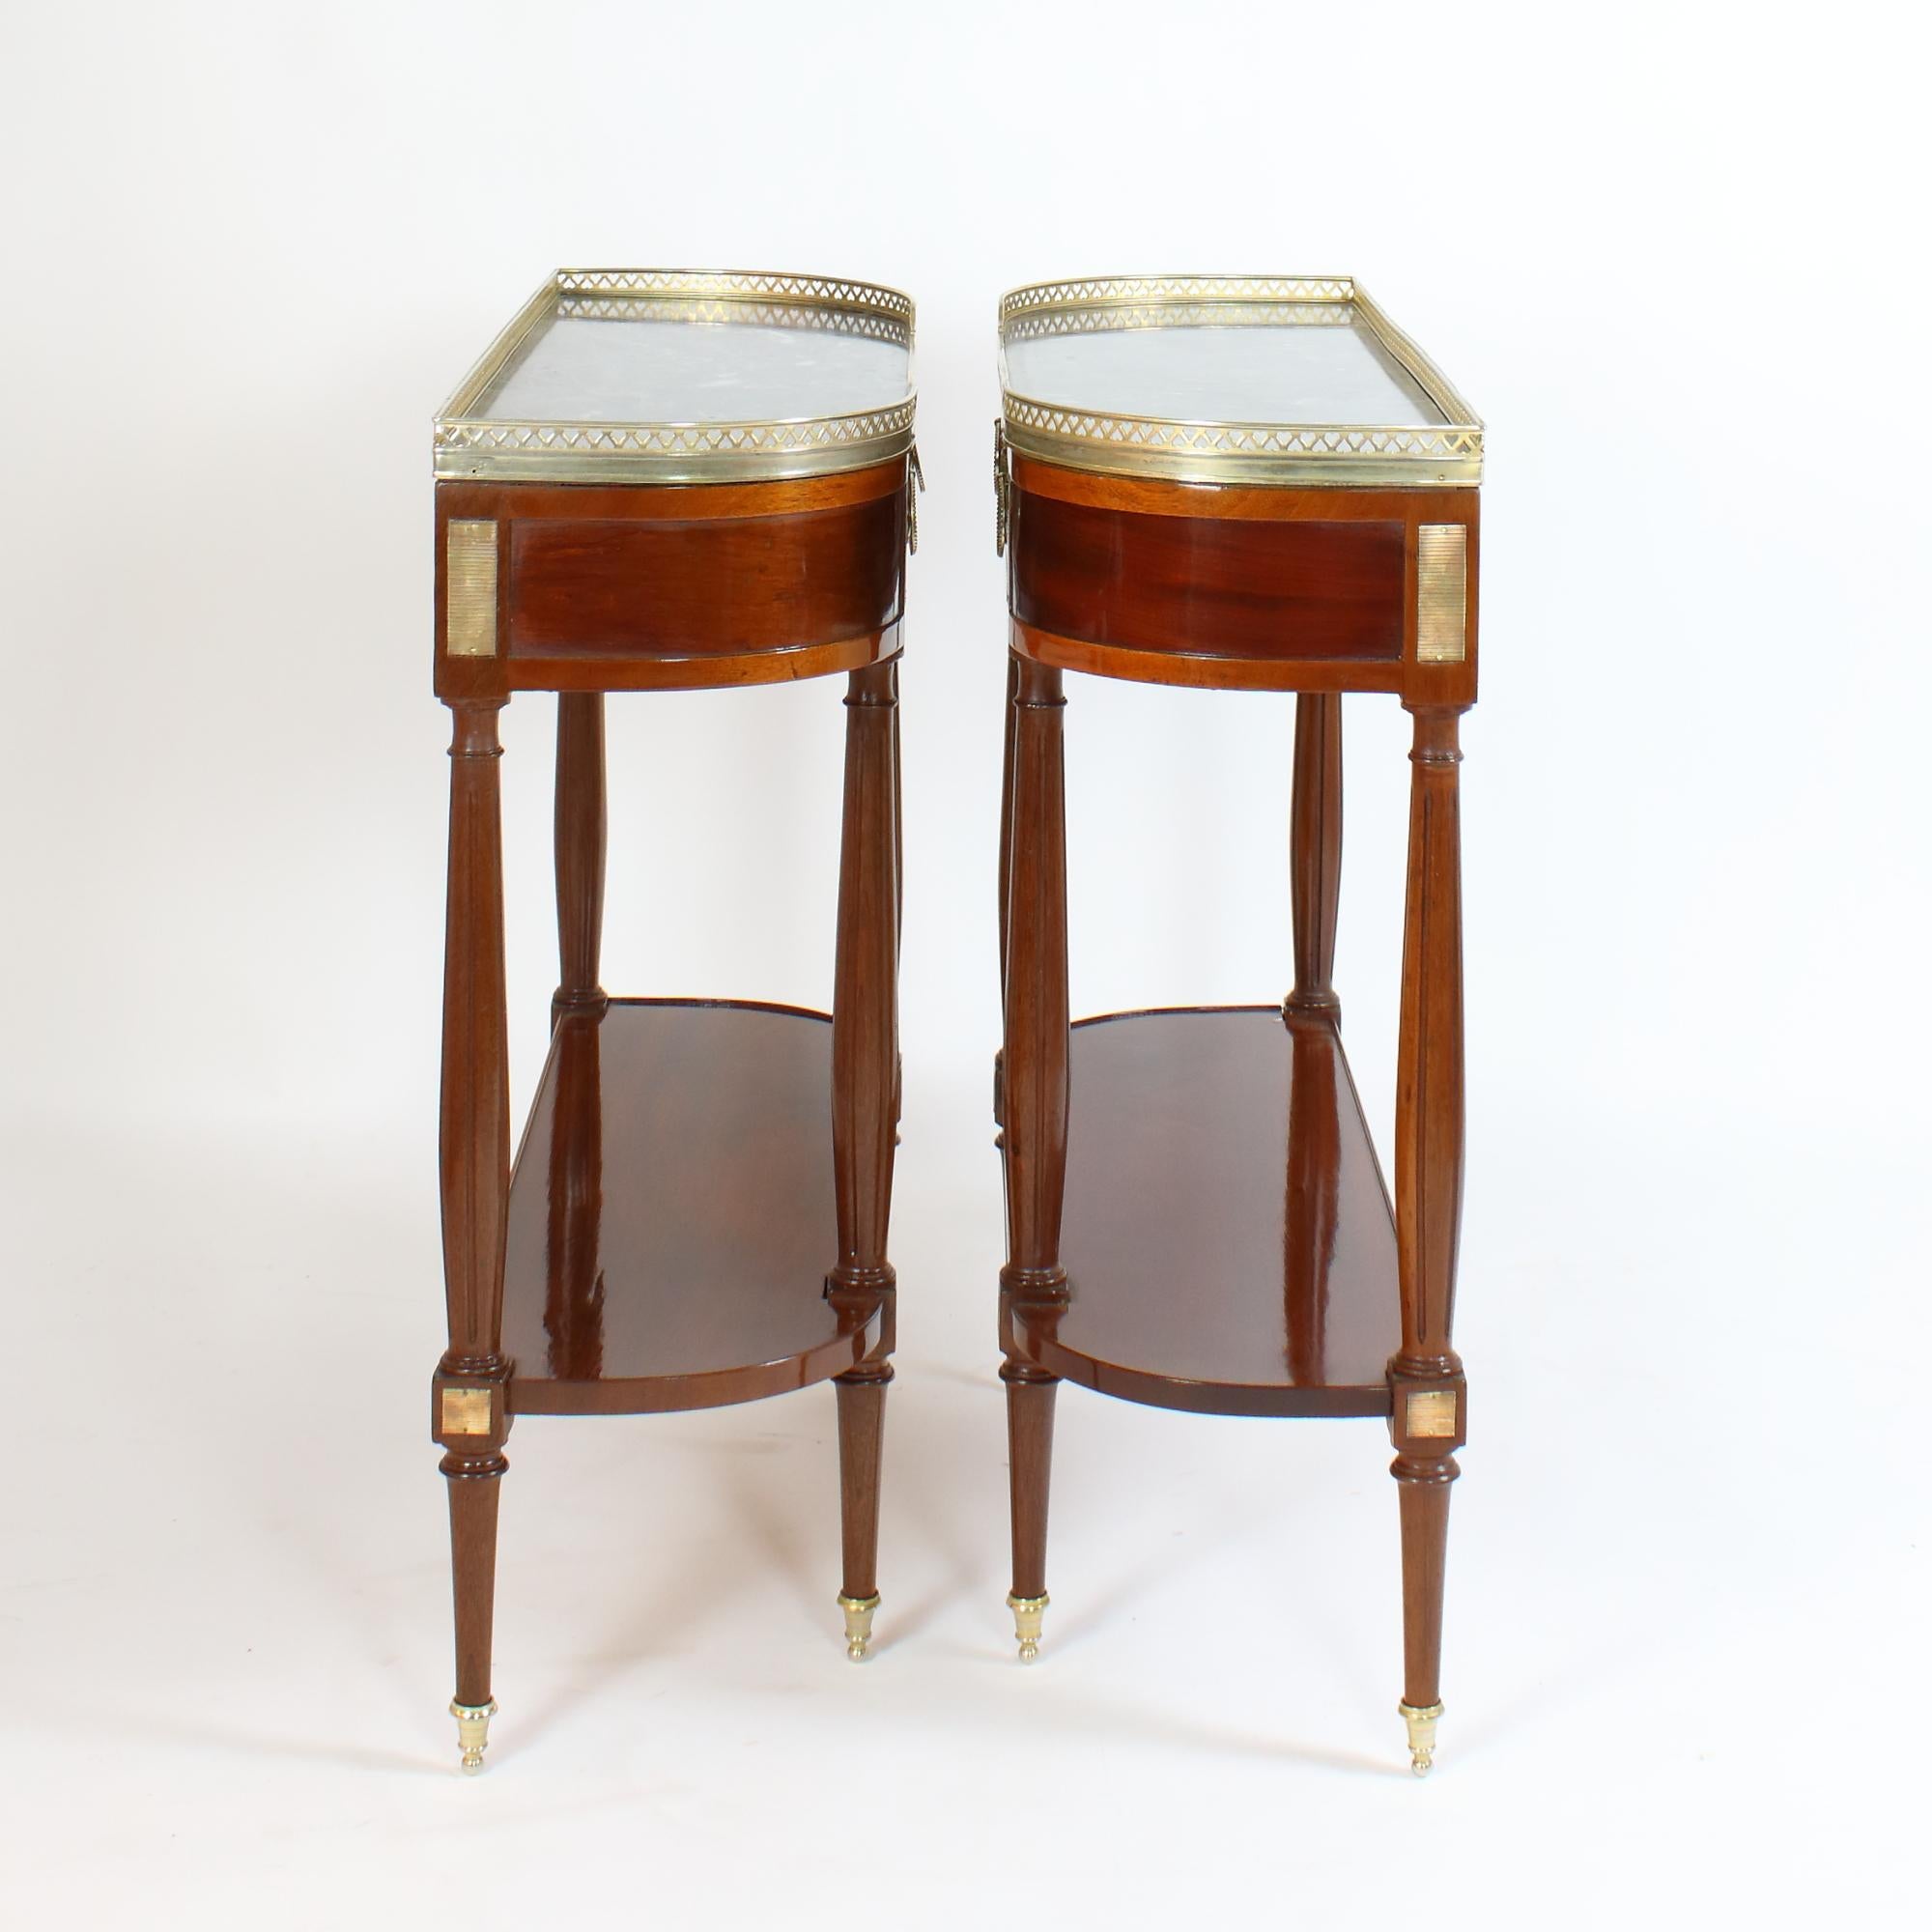 Pair of French Late 19th Century Directoire Style Demilune Console Tables For Sale 1